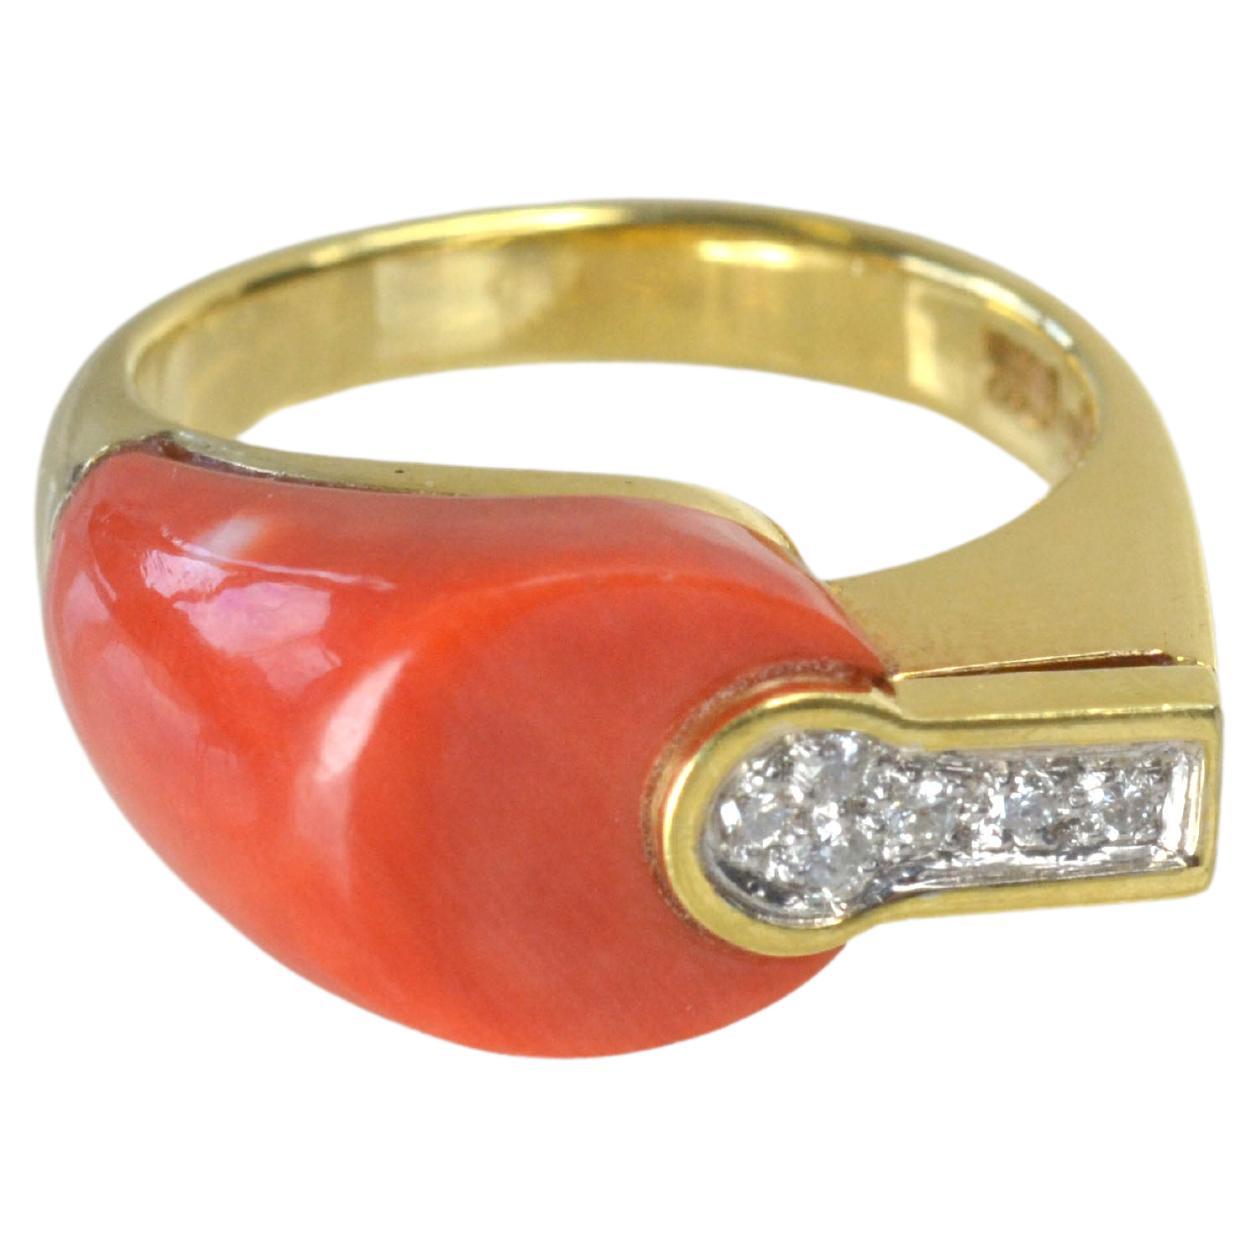 Vintage 18k Gold Coral and White Diamond Ring One-of-a-kind